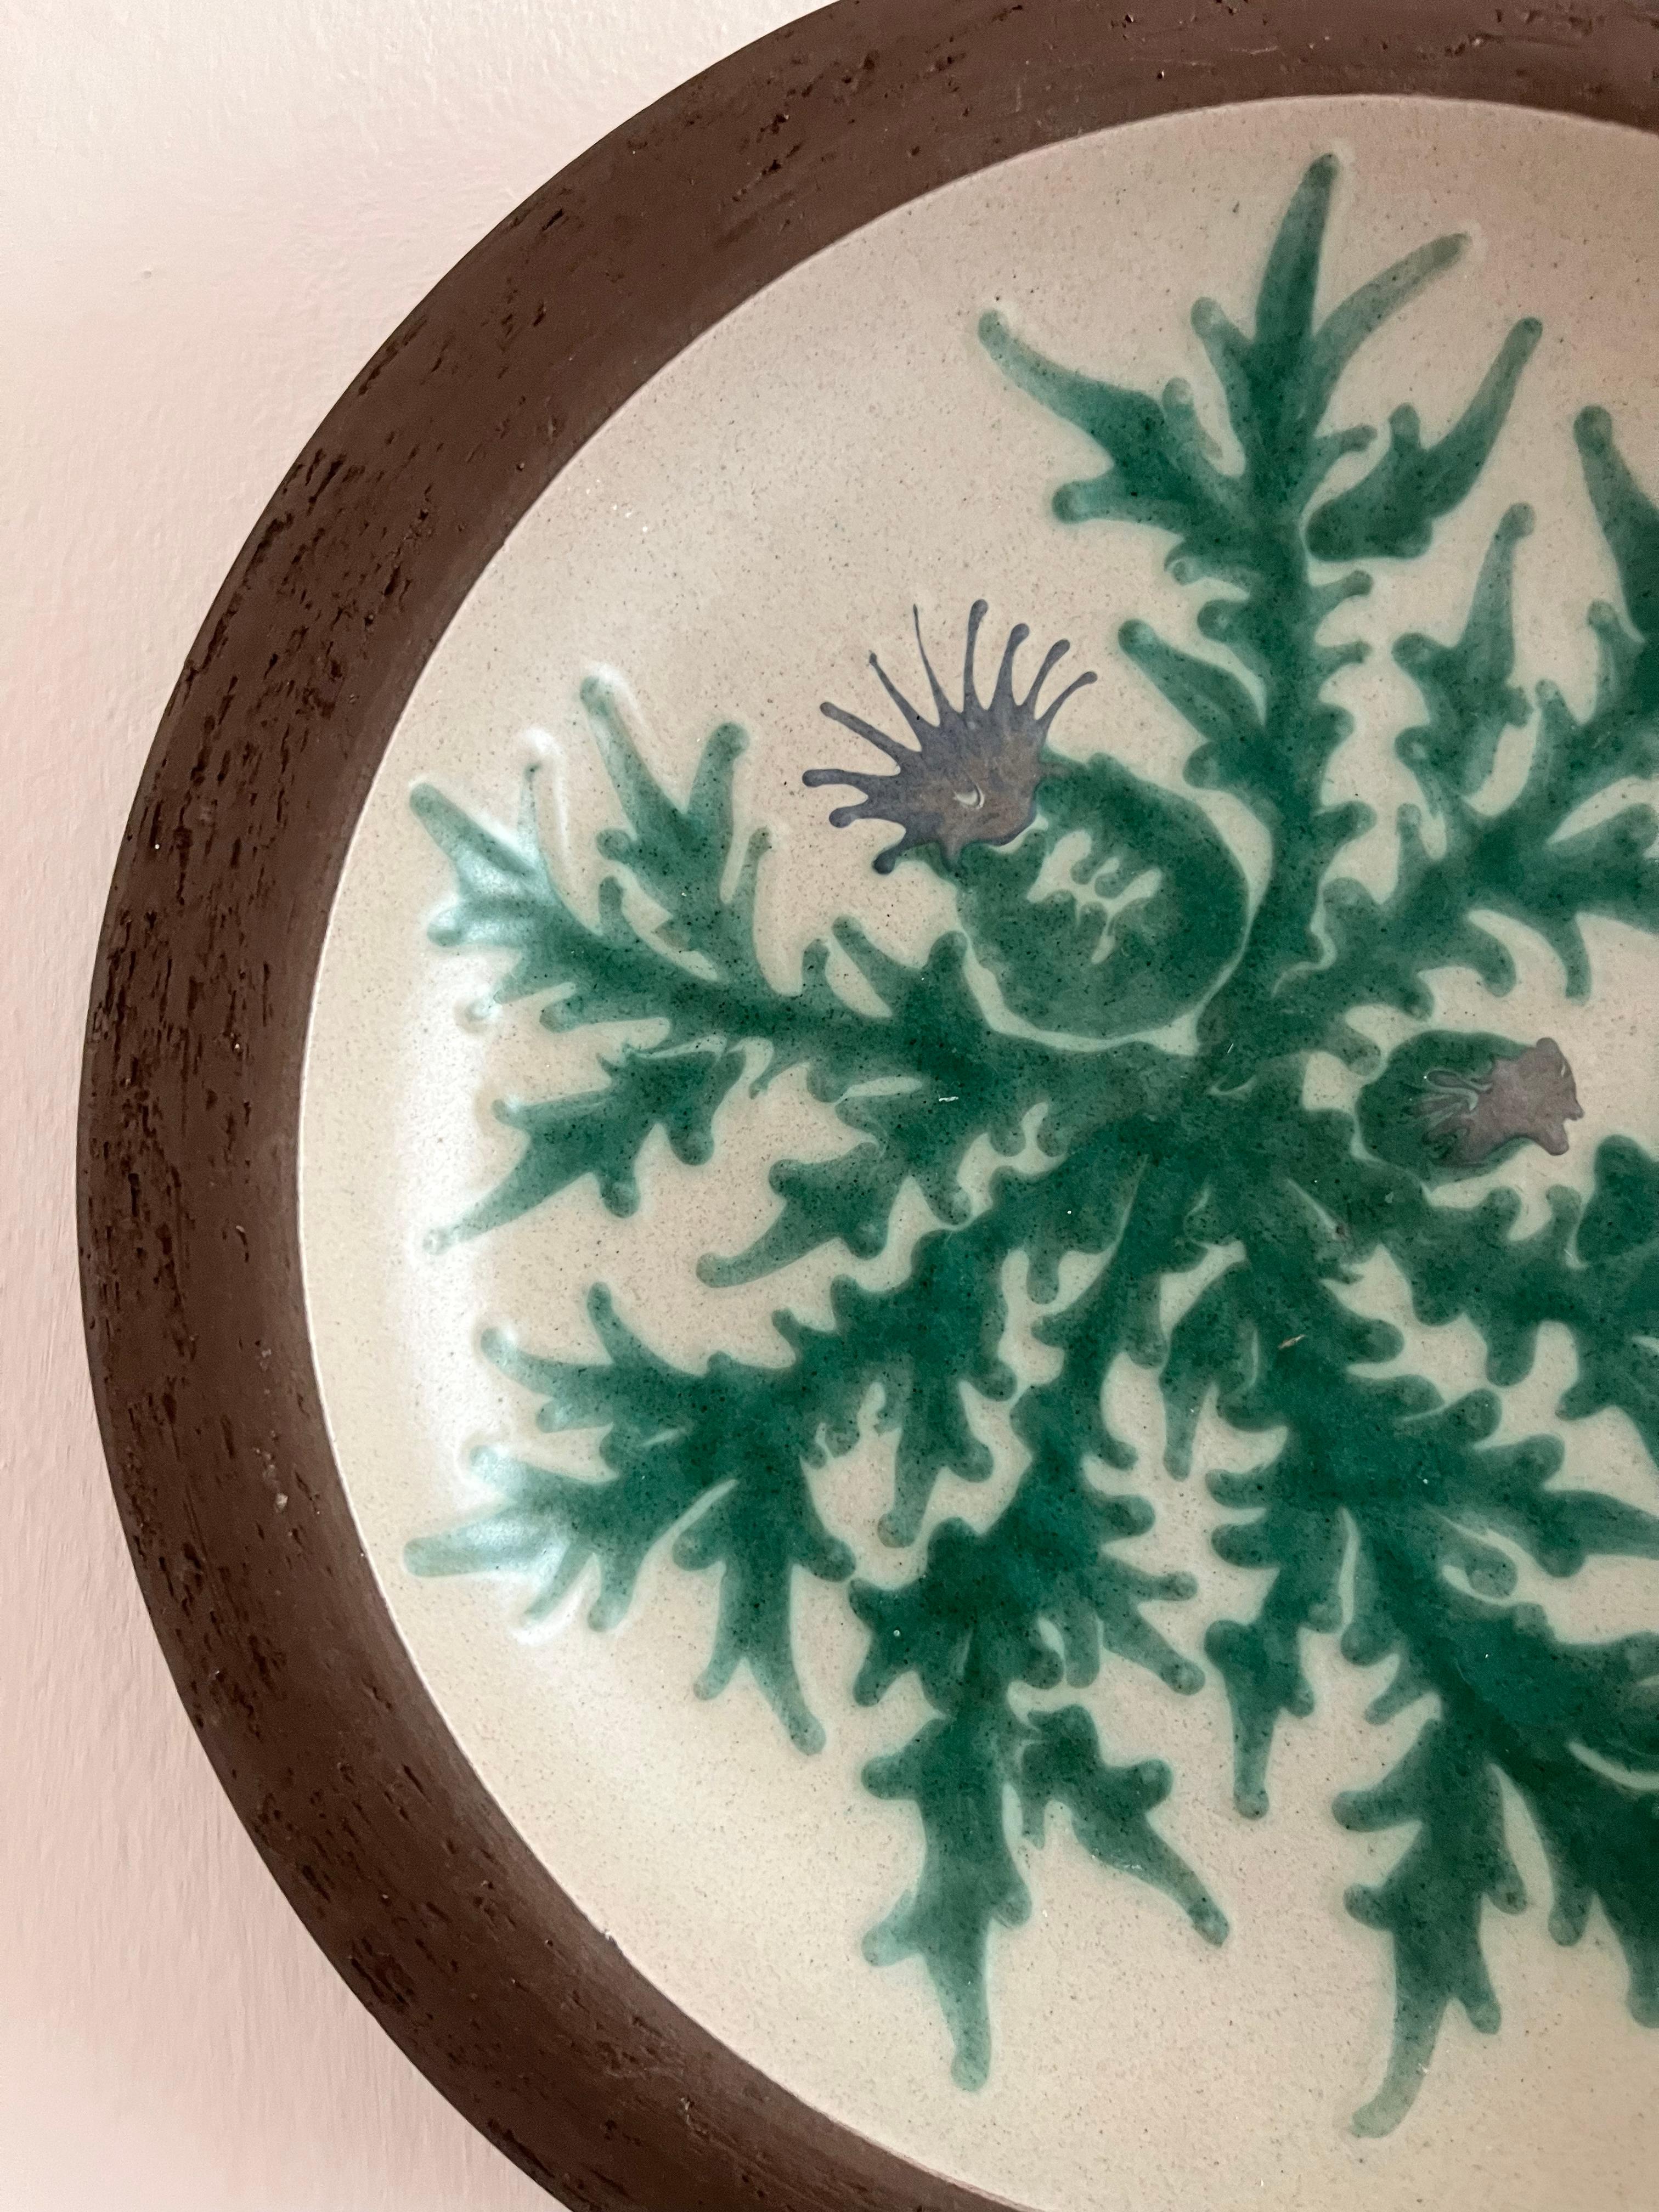 1970s earthenware wall decoration with thistle decorations In Good Condition For Sale In Frederiksberg C, DK